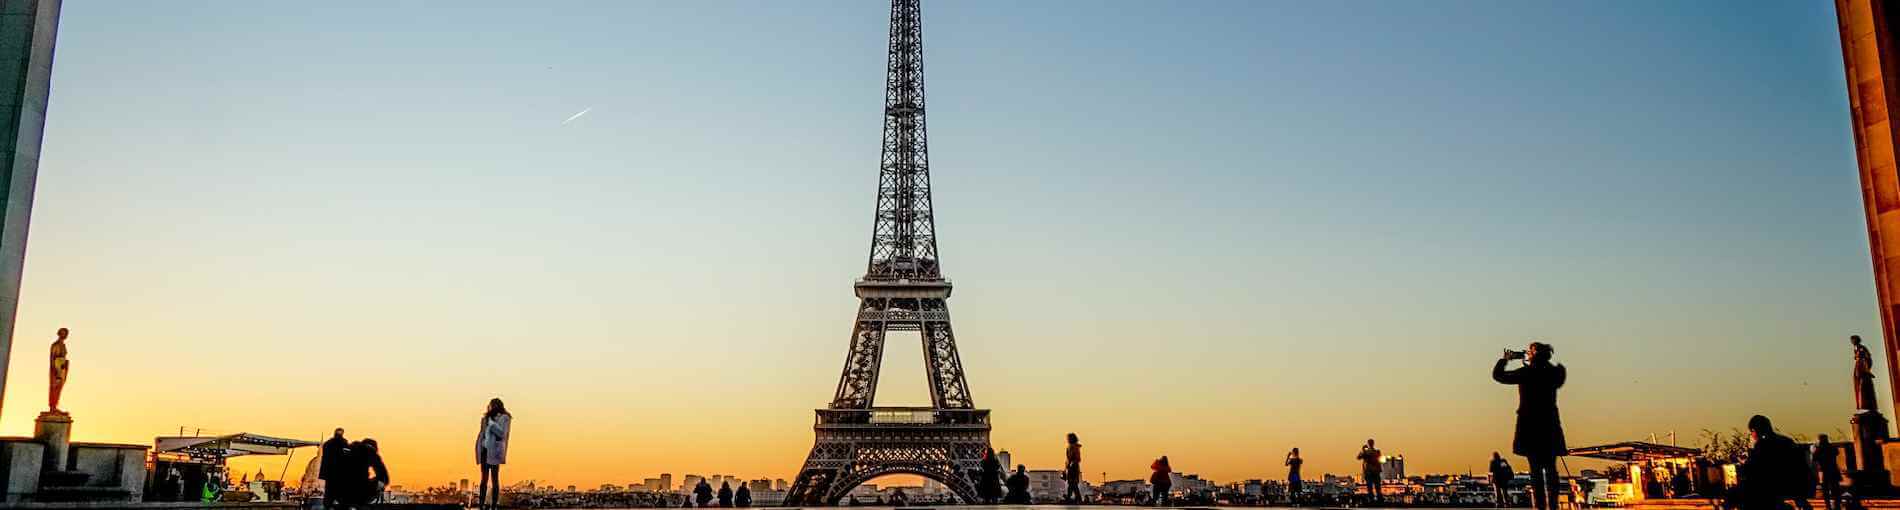 Paris France - picture of the Eiffel Tower